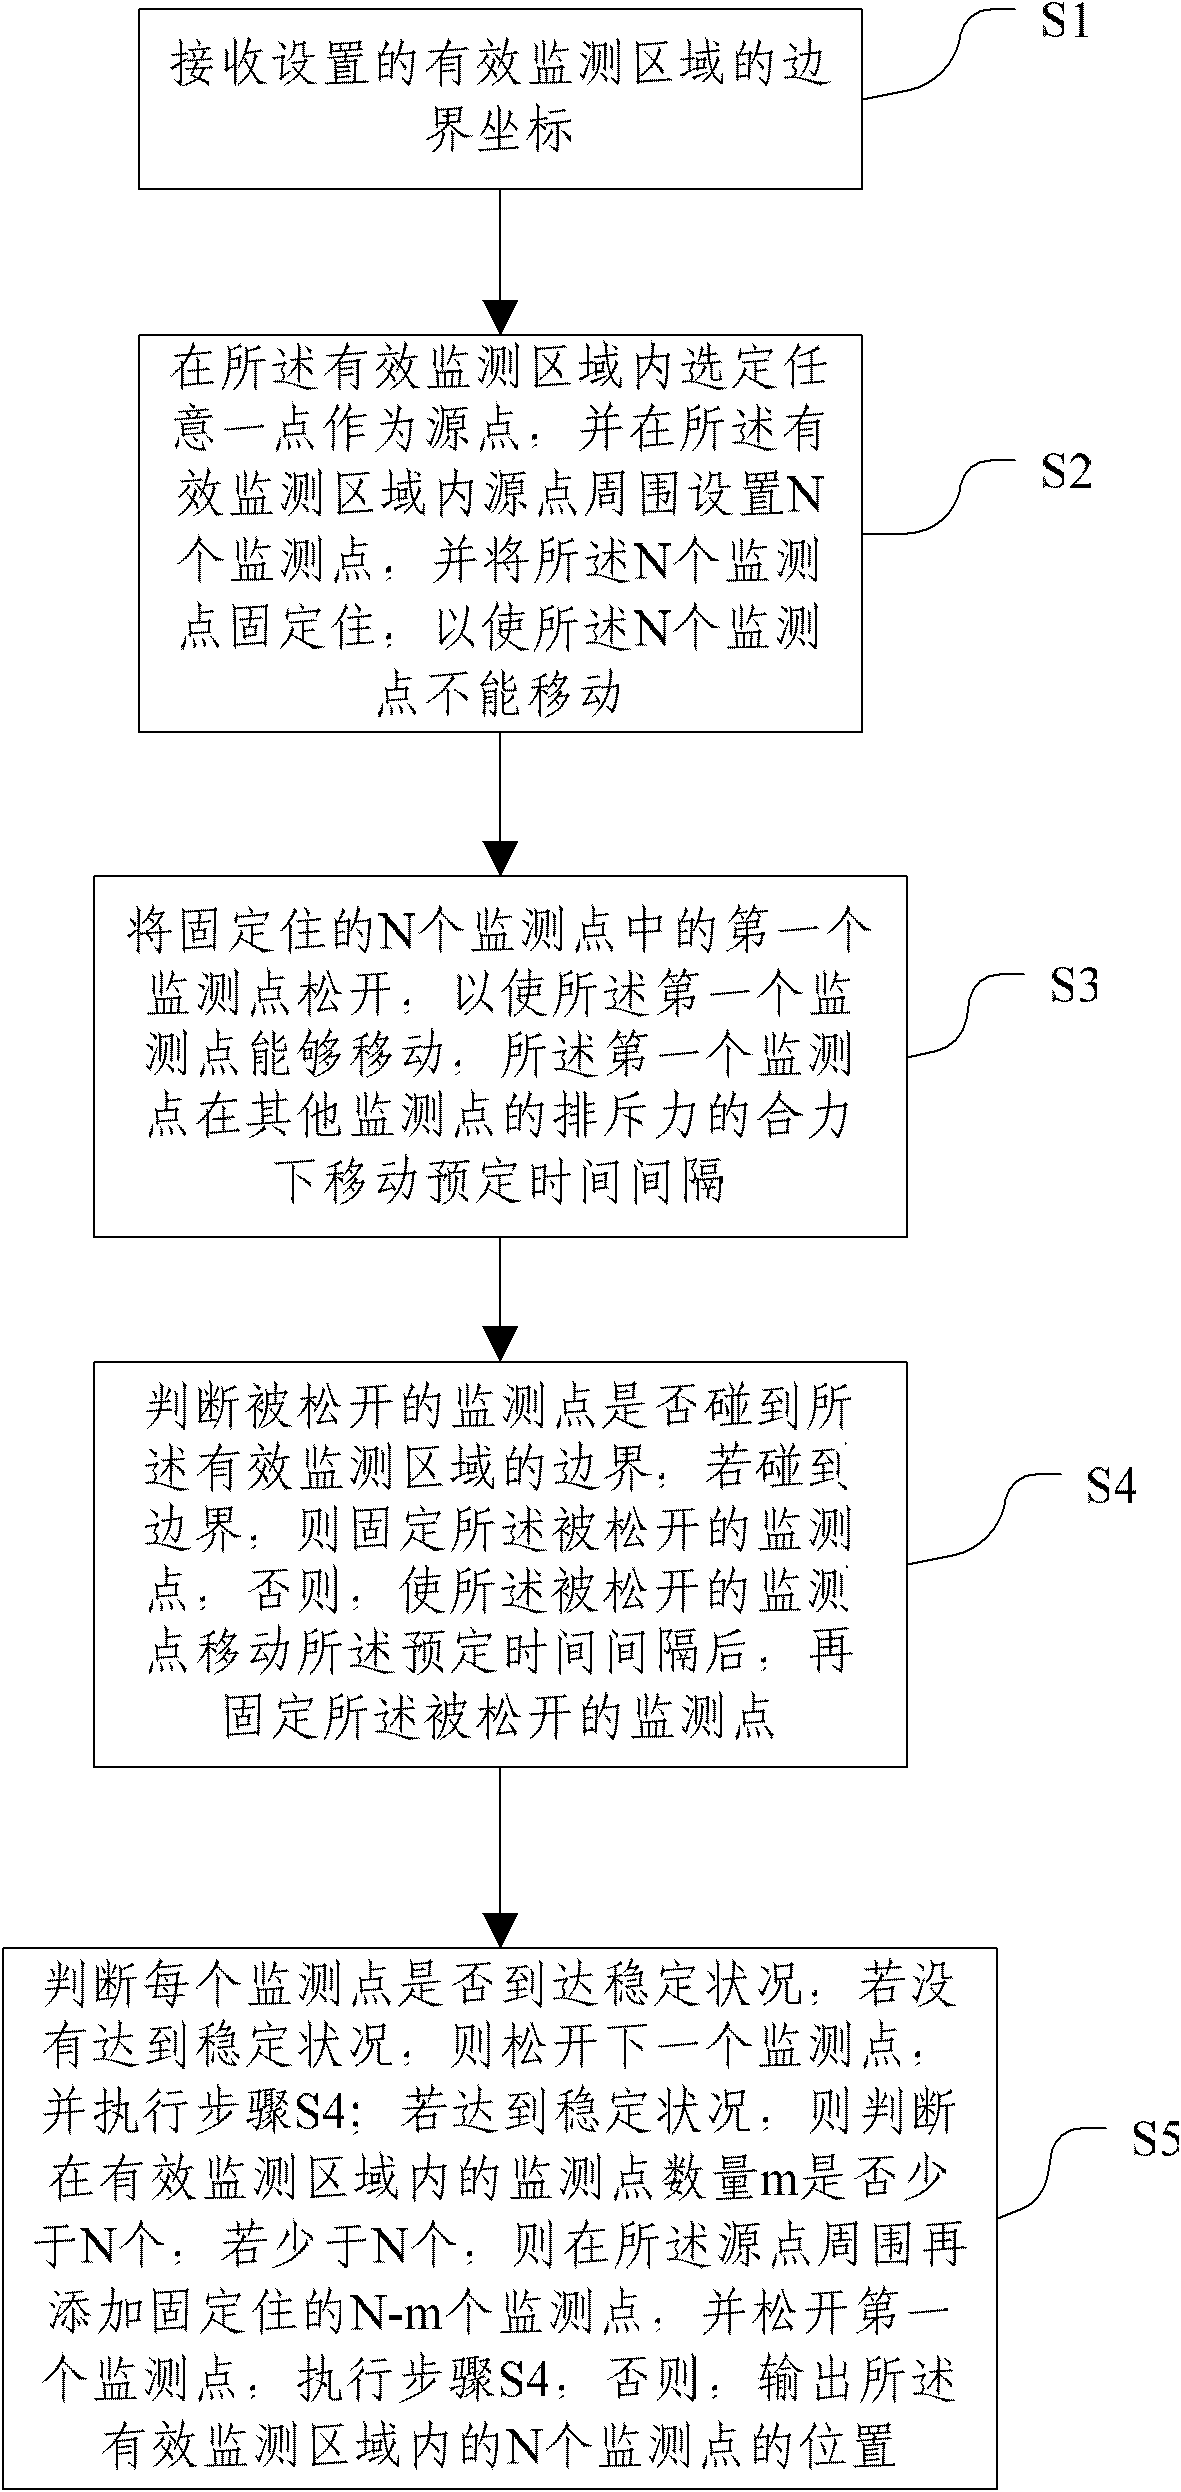 Method and system for optimizing uniform layout of regional scale monitoring points